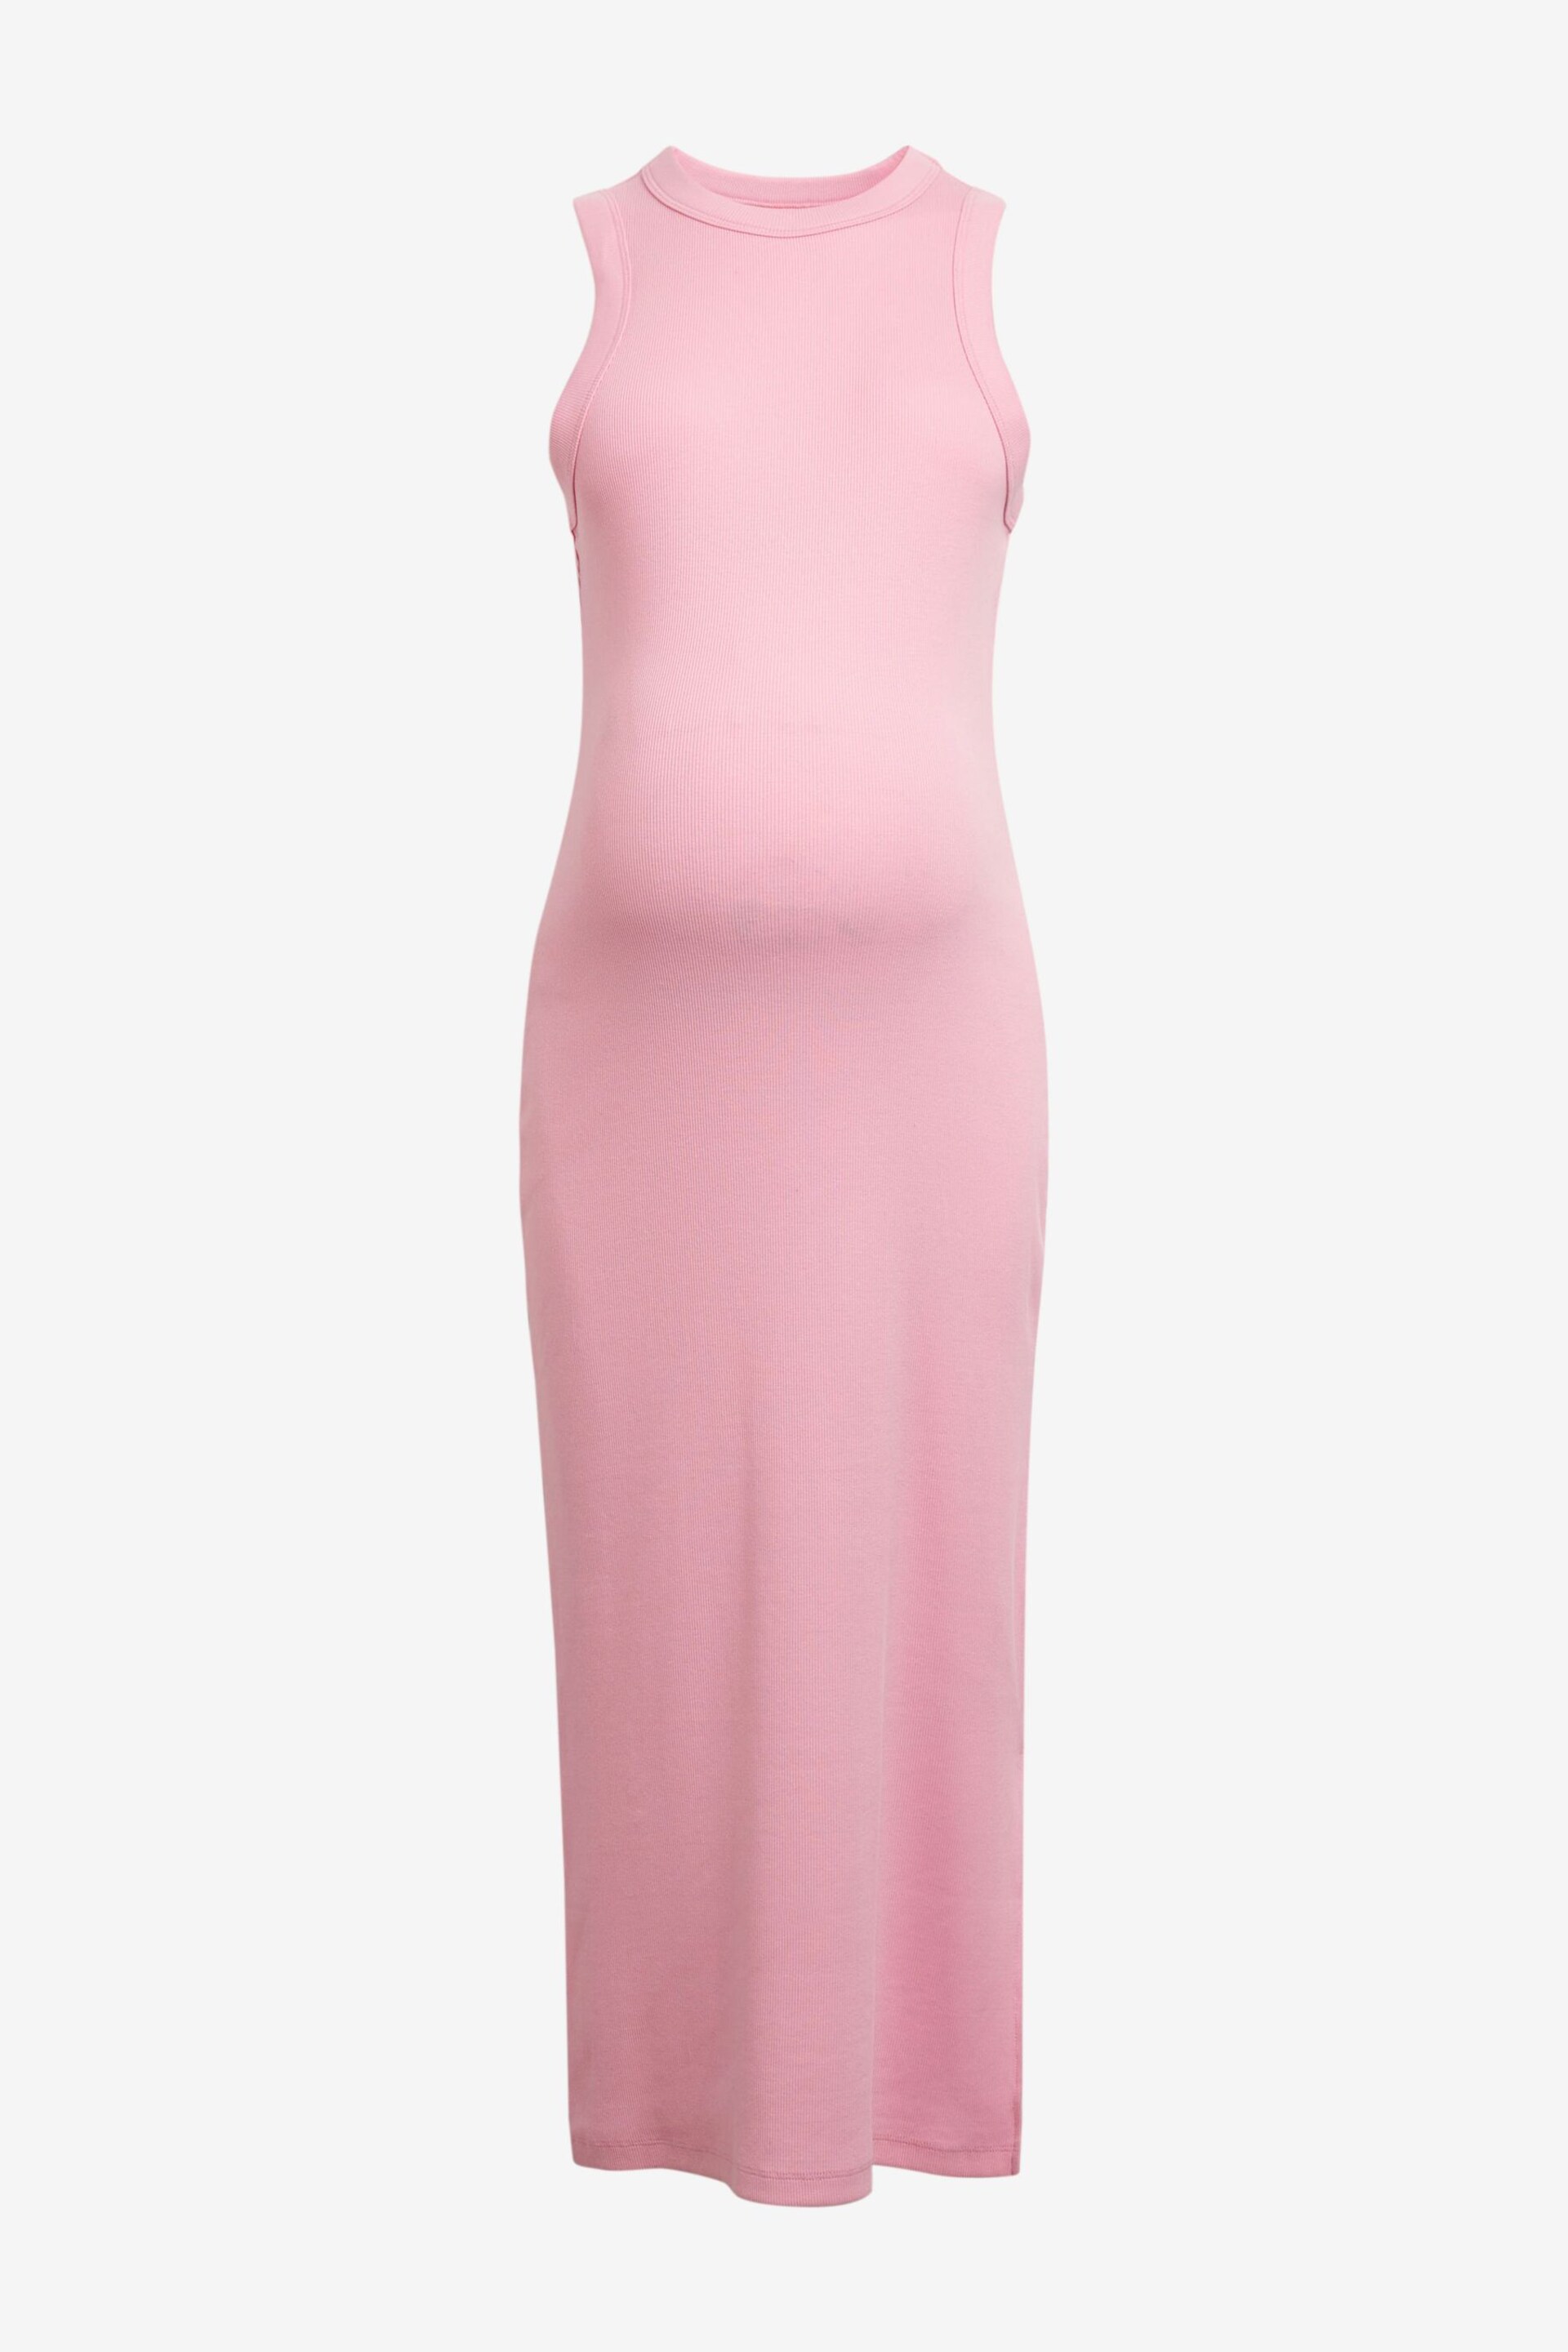 Pink Maternity Ribbed Dress - Image 5 of 7